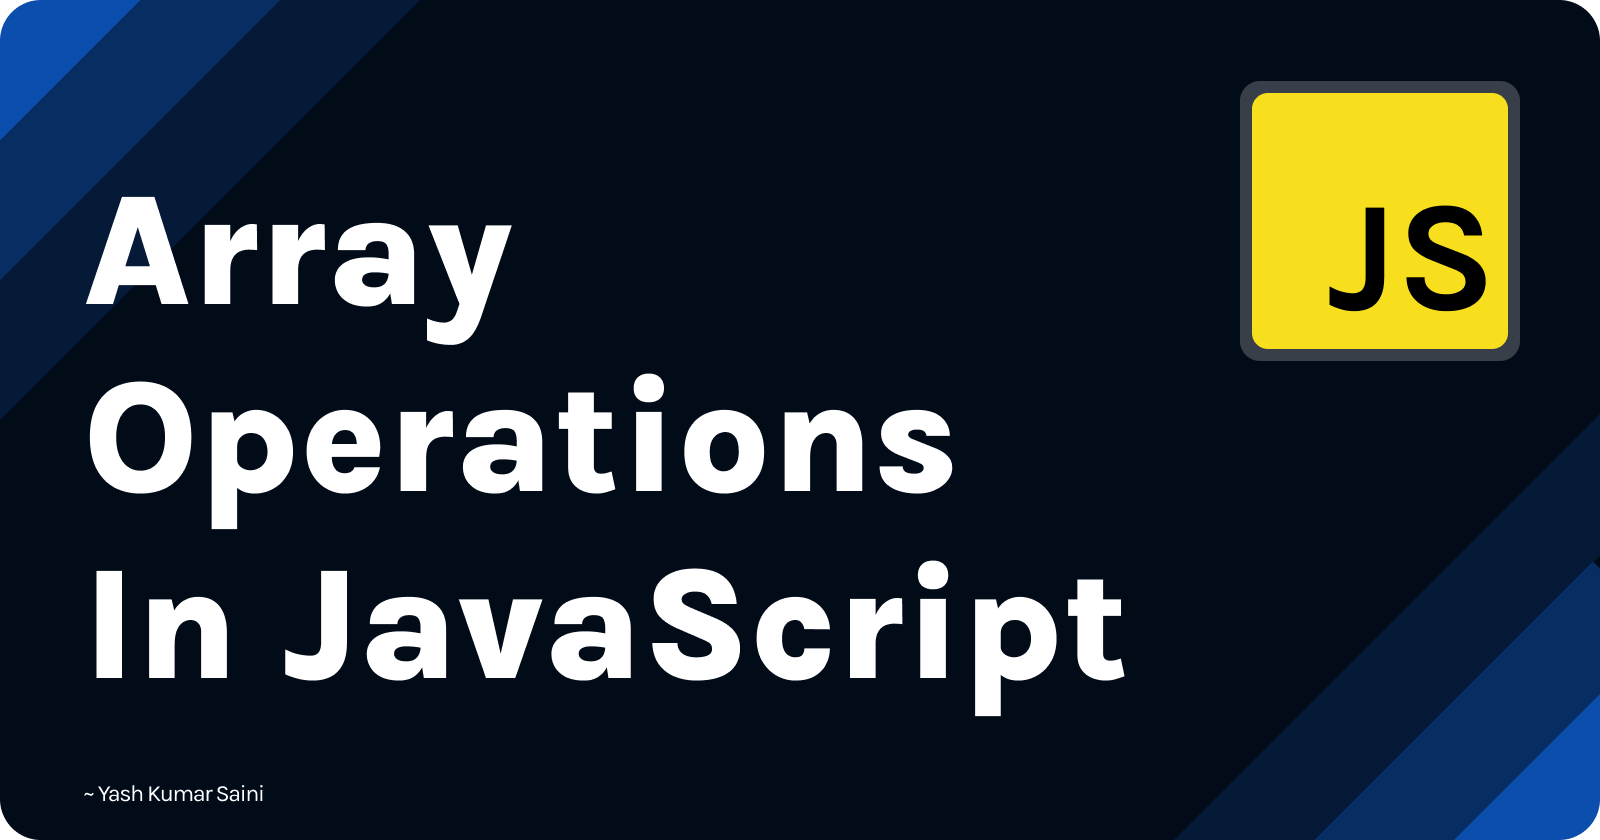 Array Operations in JavaScript